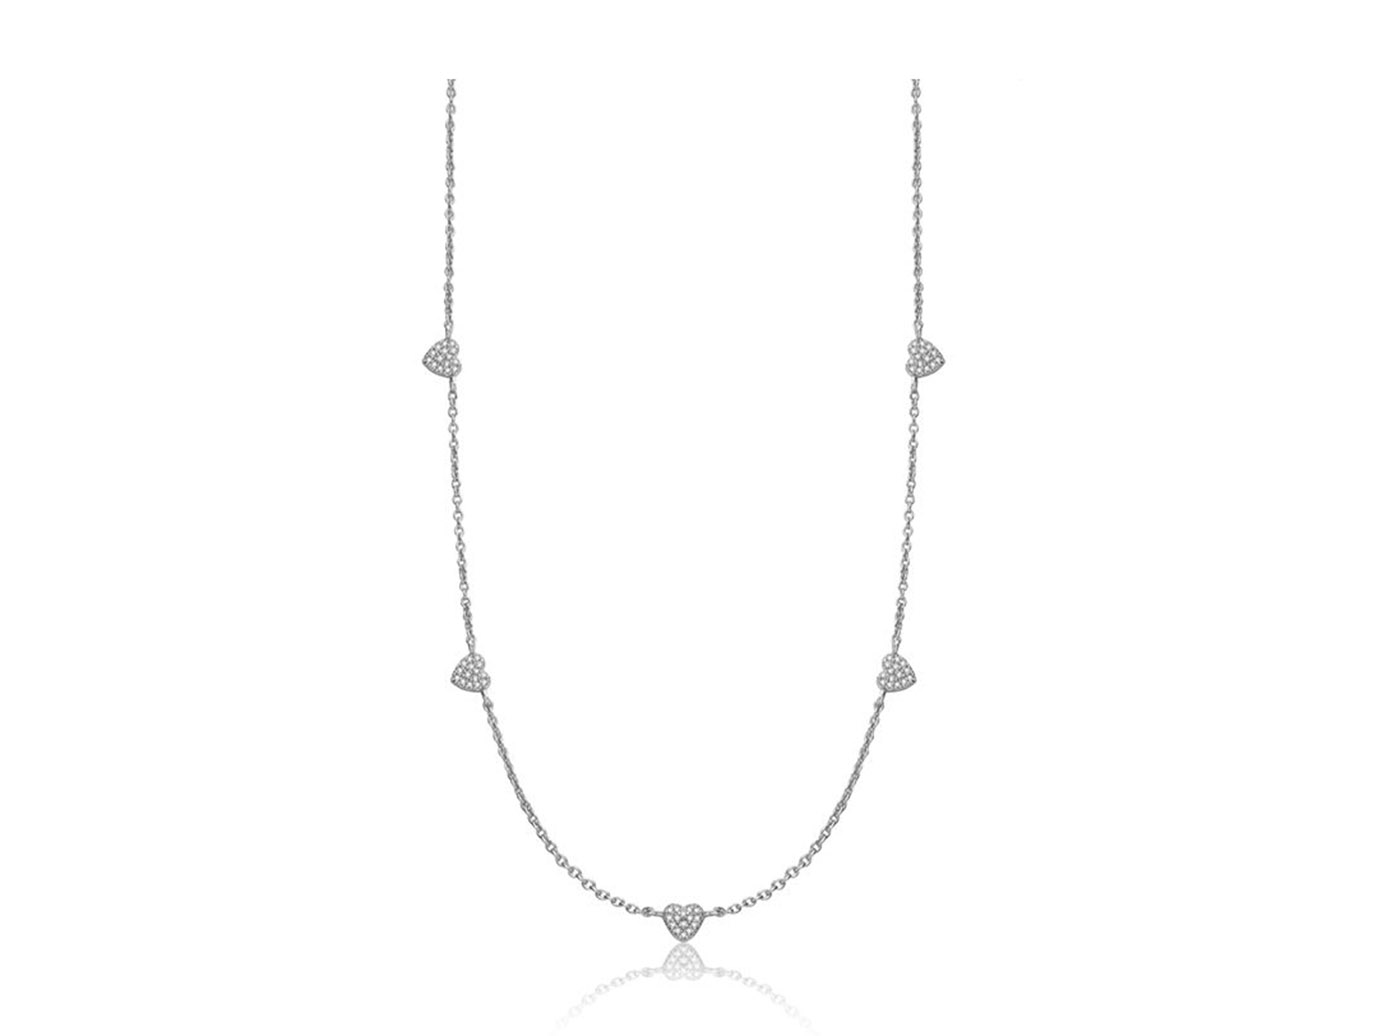  Silver Pave CZ Heart Dangling Station Chain Necklace for girls